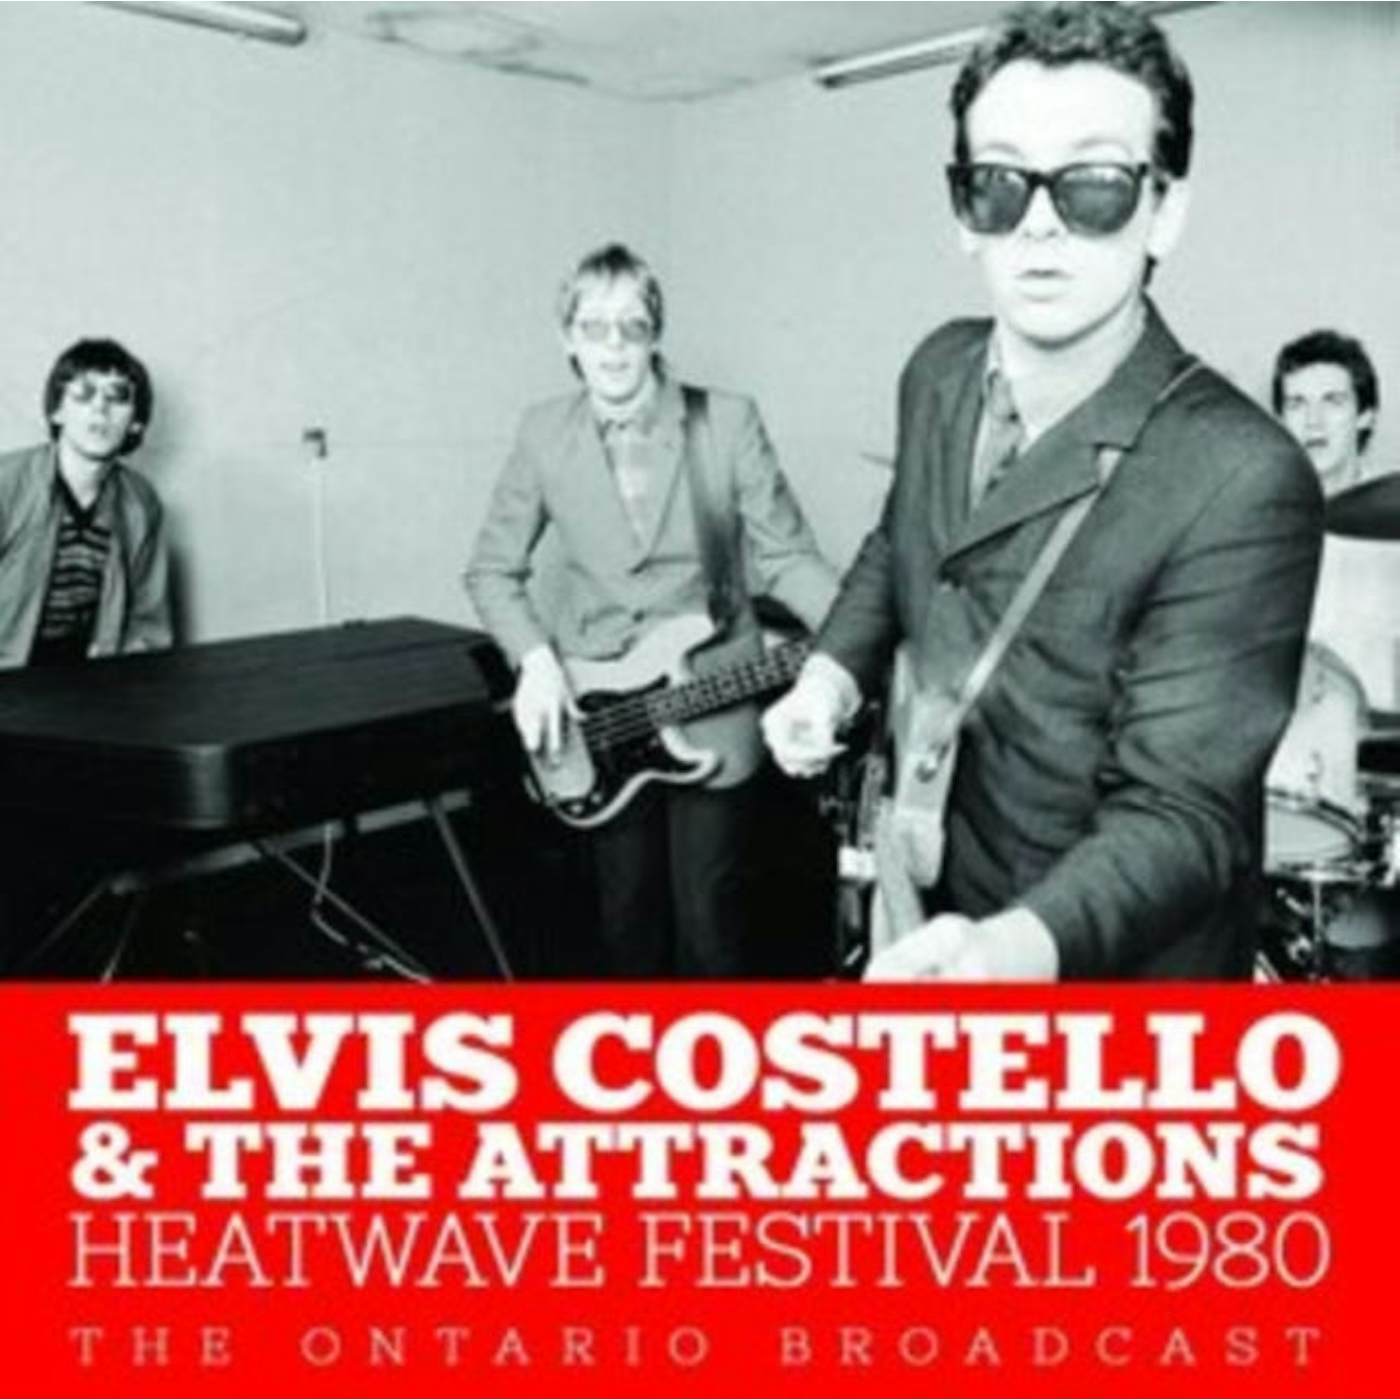 Elvis Costello & The Attractions CD - Heatwave Festival 1980